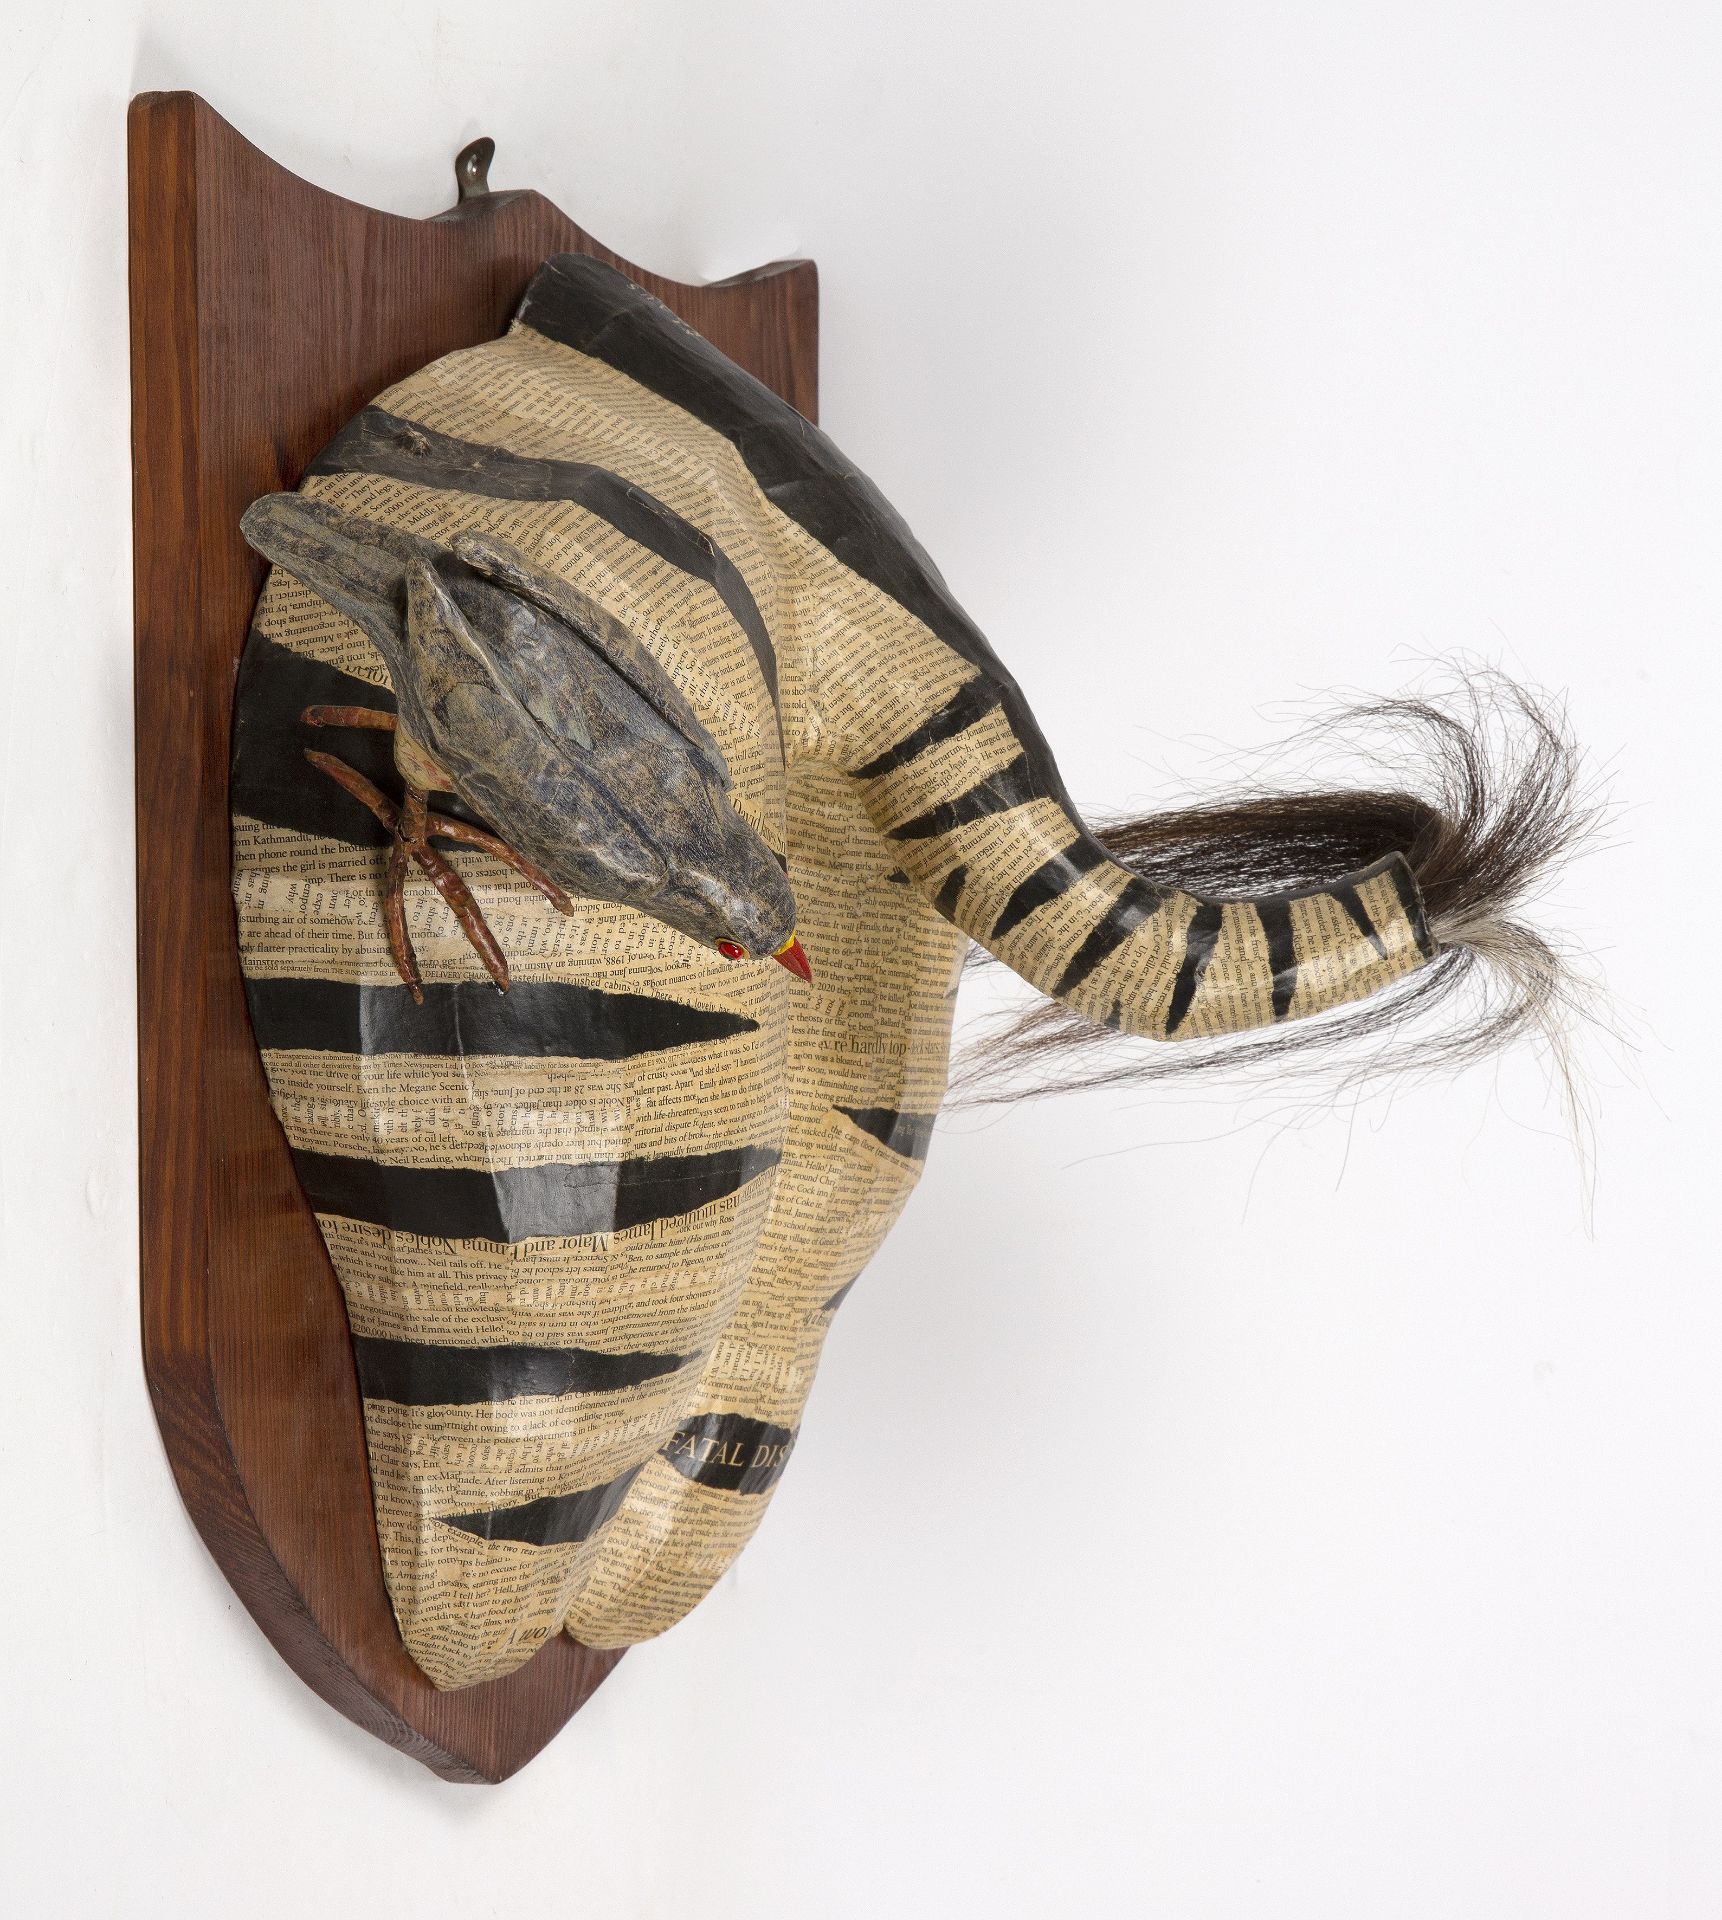 David Farrer (b.1968) 'Zebra bottom with oxpecker', papier-mâché and horse hair, stained pine shield - Image 2 of 4